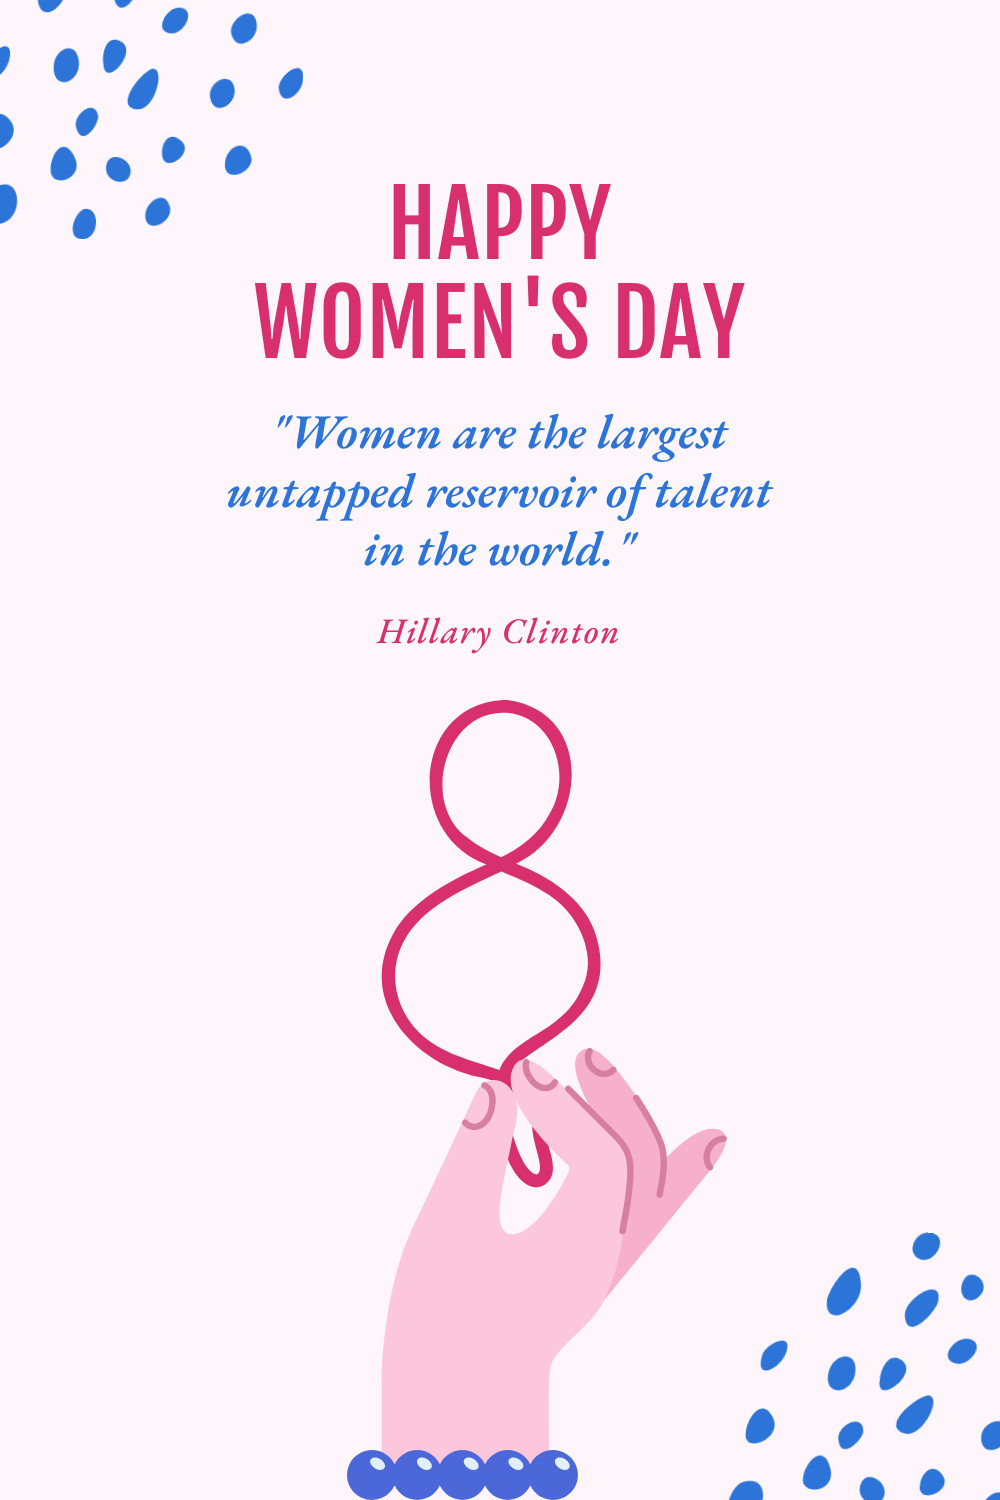 Happy Women's Day Talent Facebook Cover 820x360